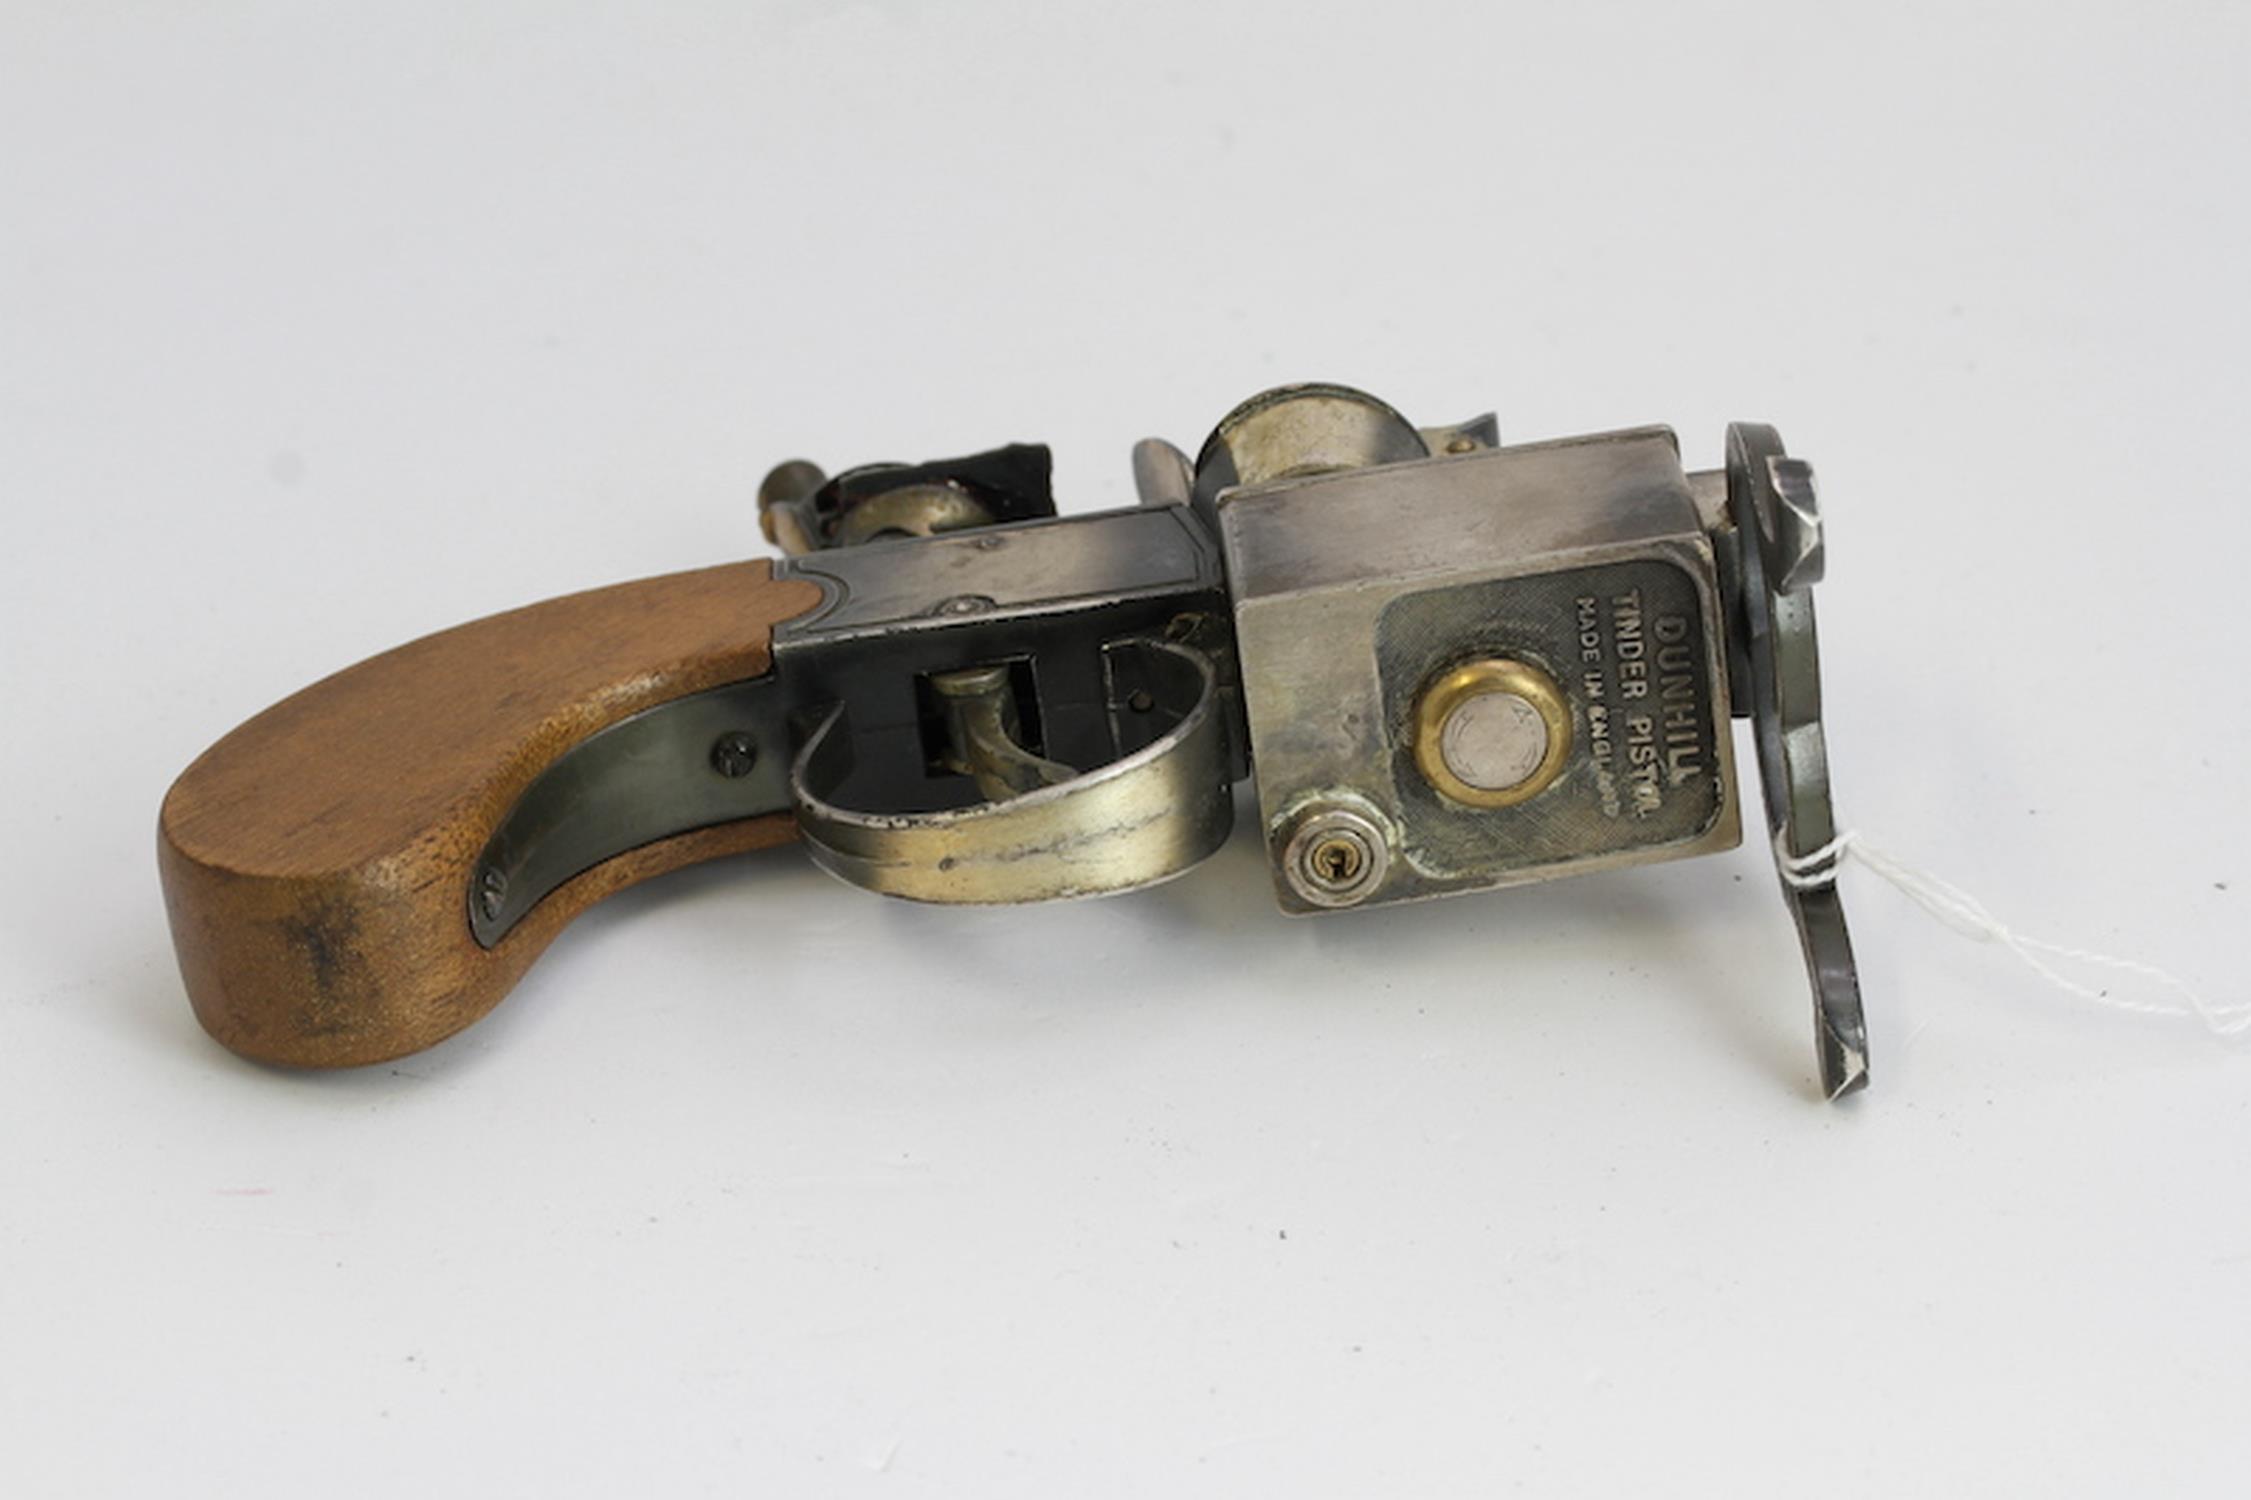 RARE DUNHILL TINDER GAS PISTOL 1968, made in England Dunhill tinder pistol, gas powered, made only - Image 3 of 3